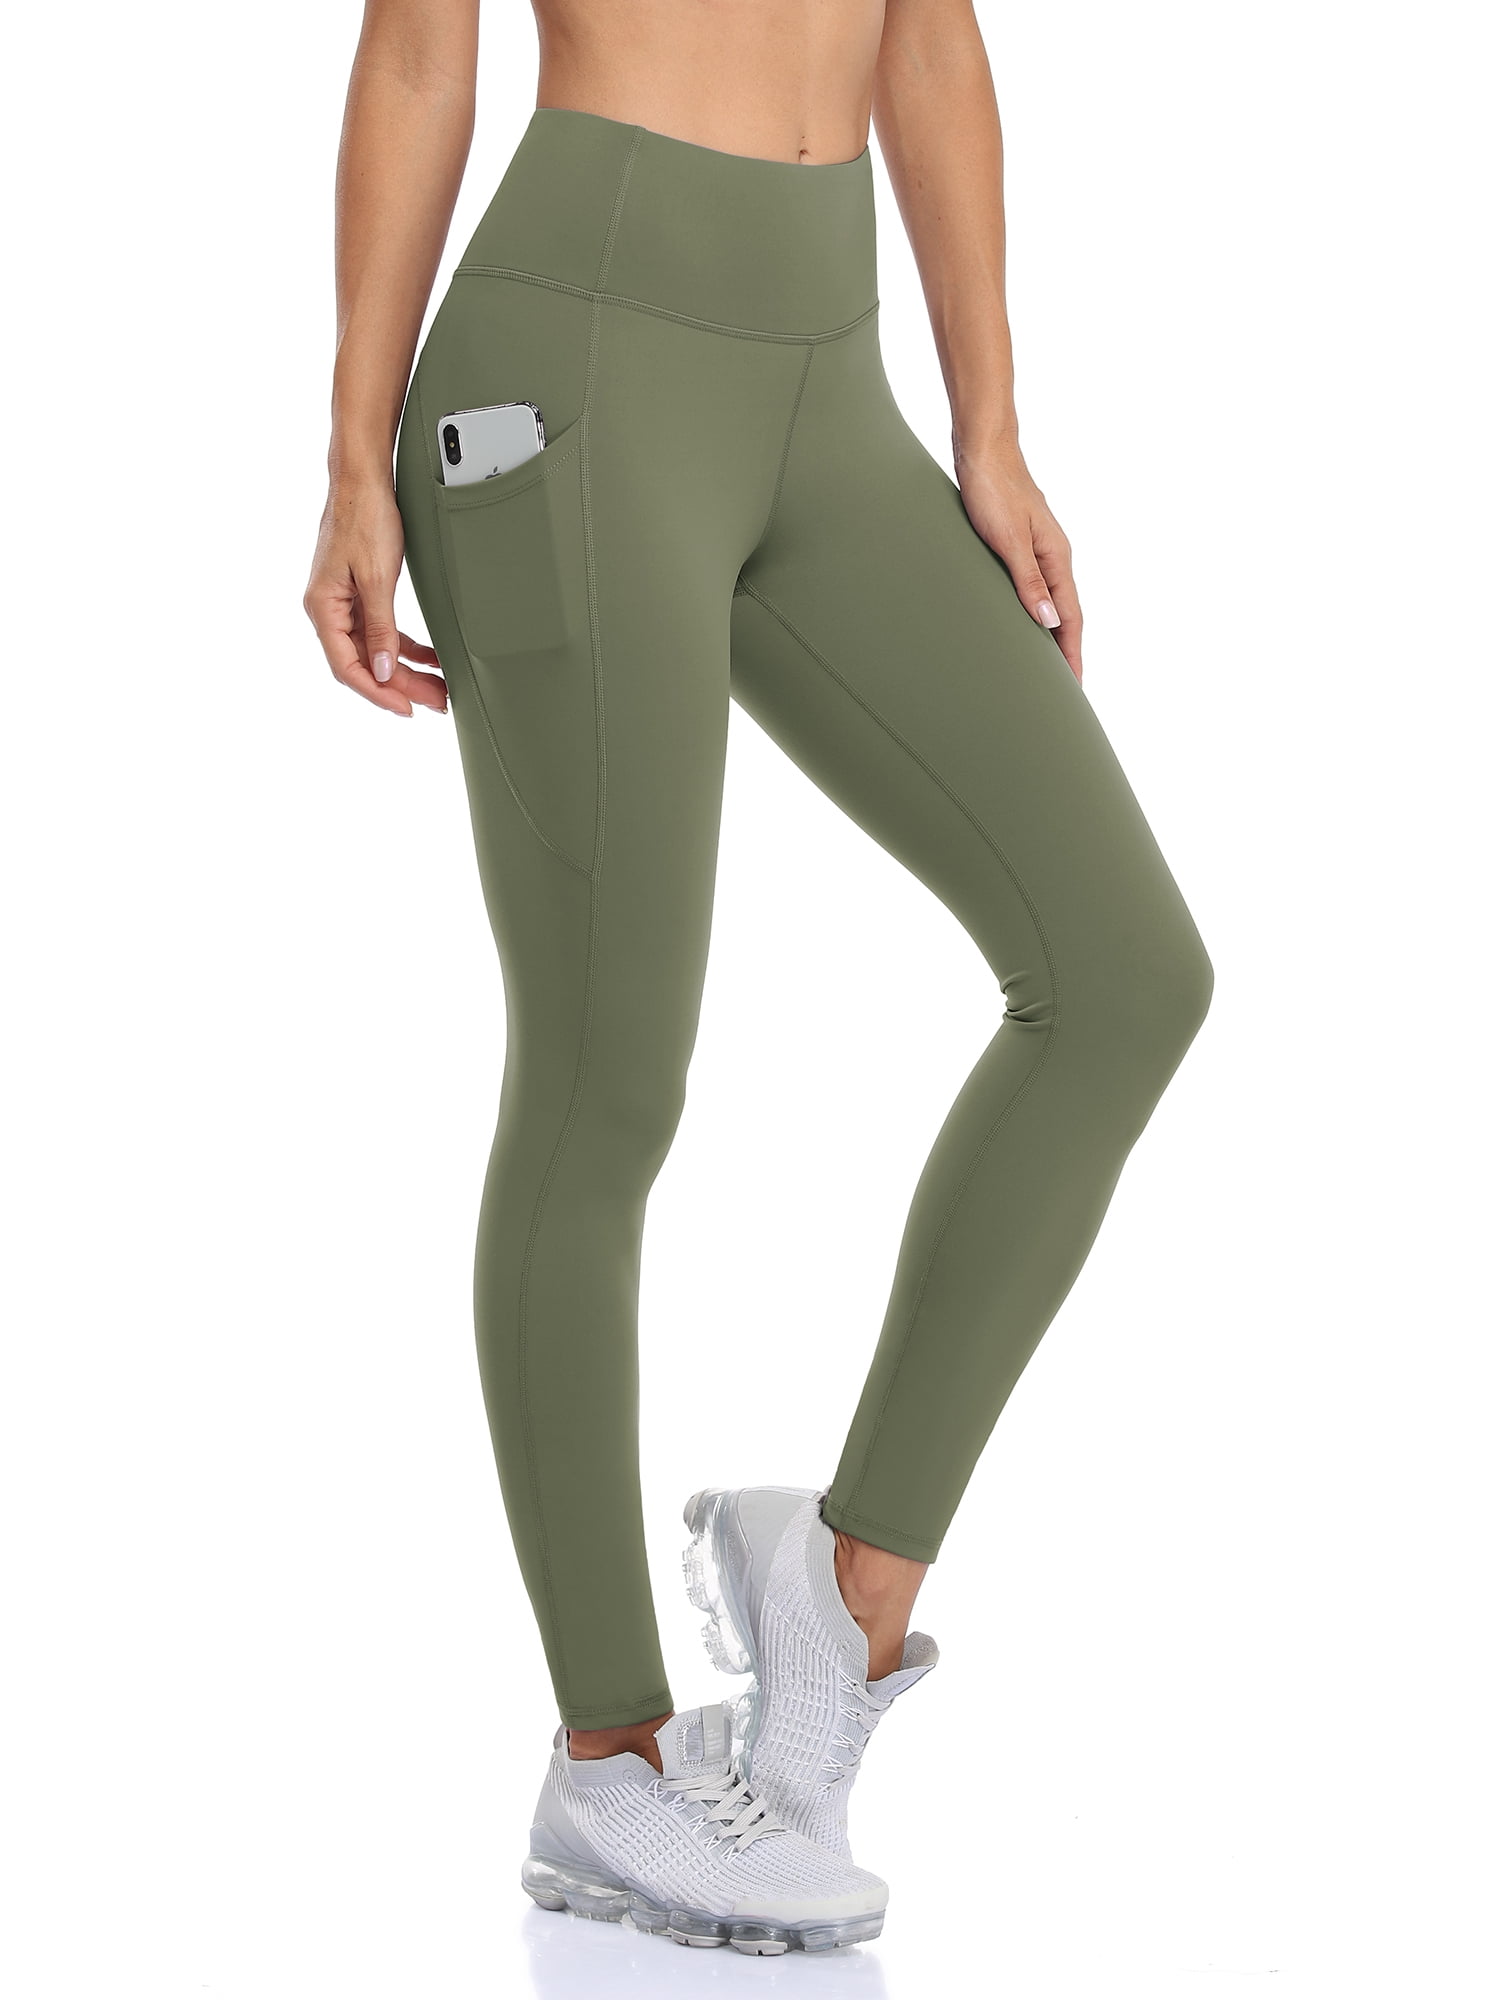 ALONG FIT Non-See-Through-Leggings for Women, Buttery Soft Yoga-Pants with  Phone Pockets, – Mangatelectric